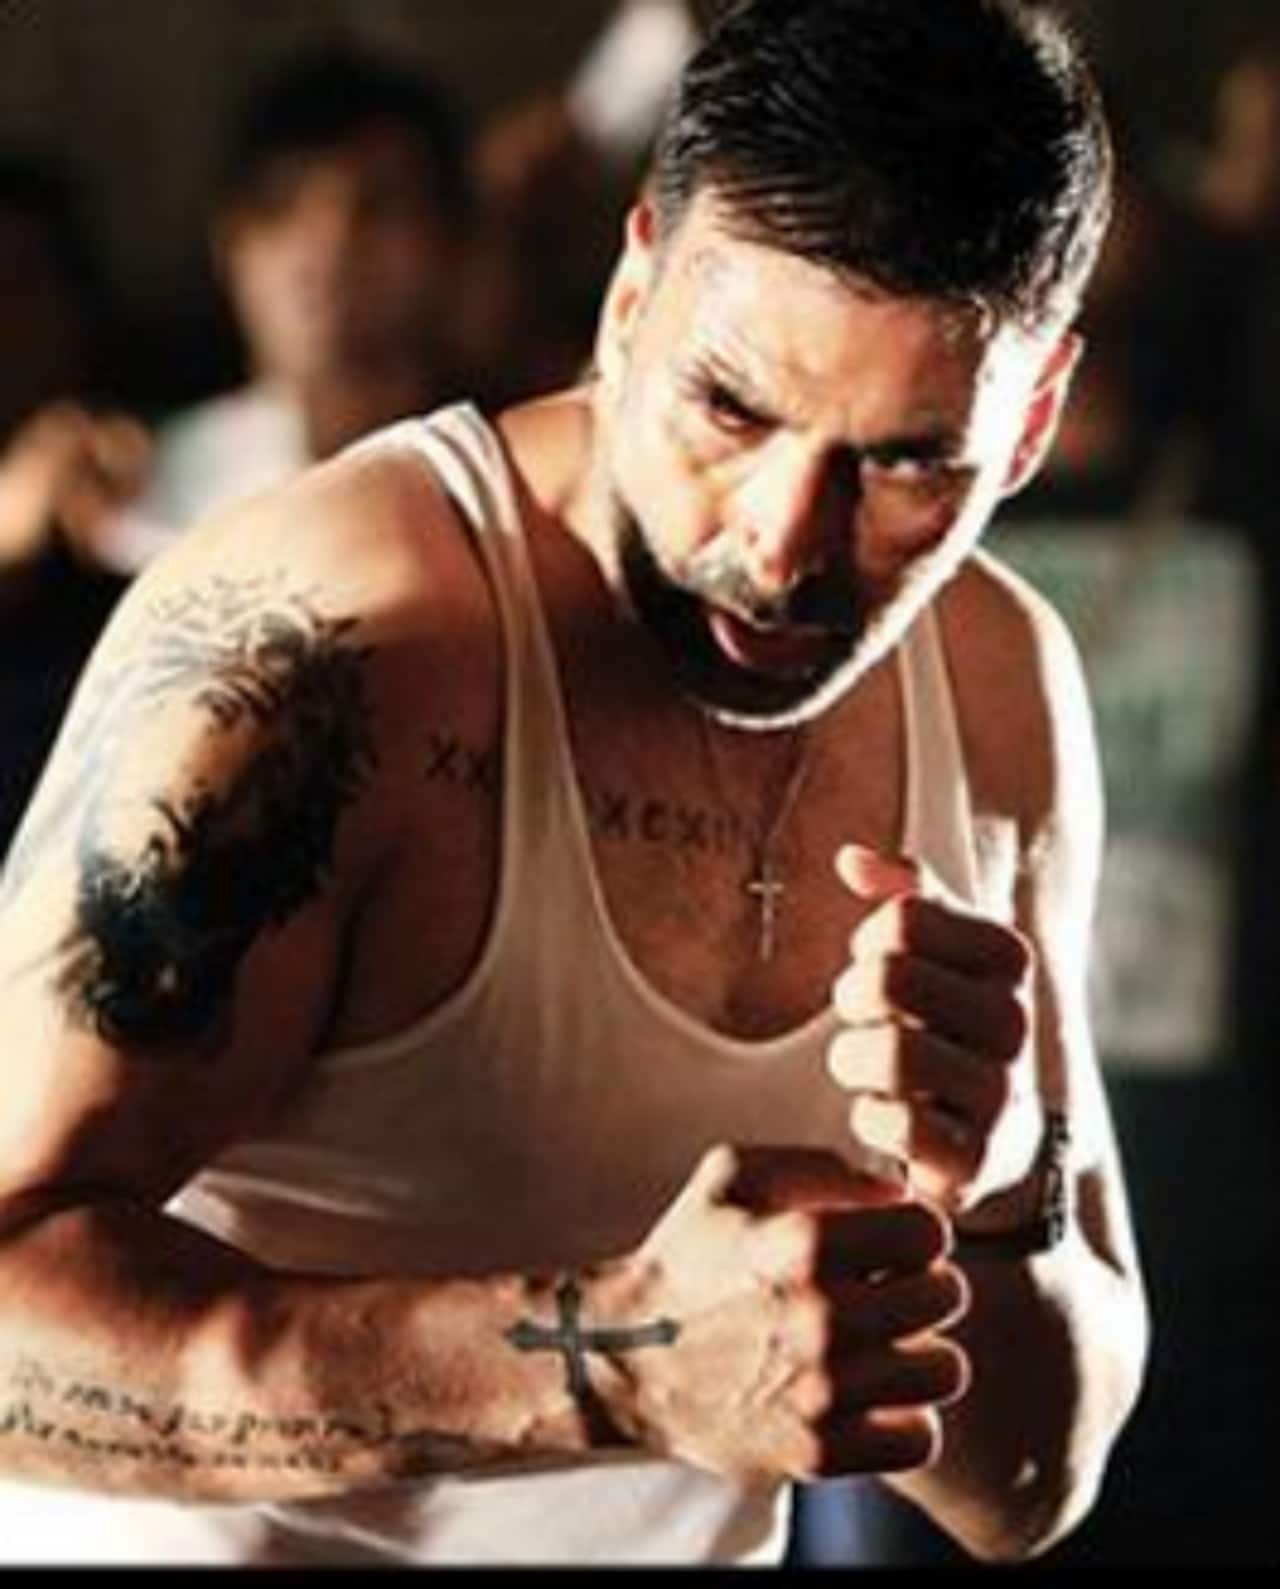 Revealed: The inspiration behind Akshay Kumar's tattoos in Brothers! -  Bollywood News & Gossip, Movie Reviews, Trailers & Videos at  